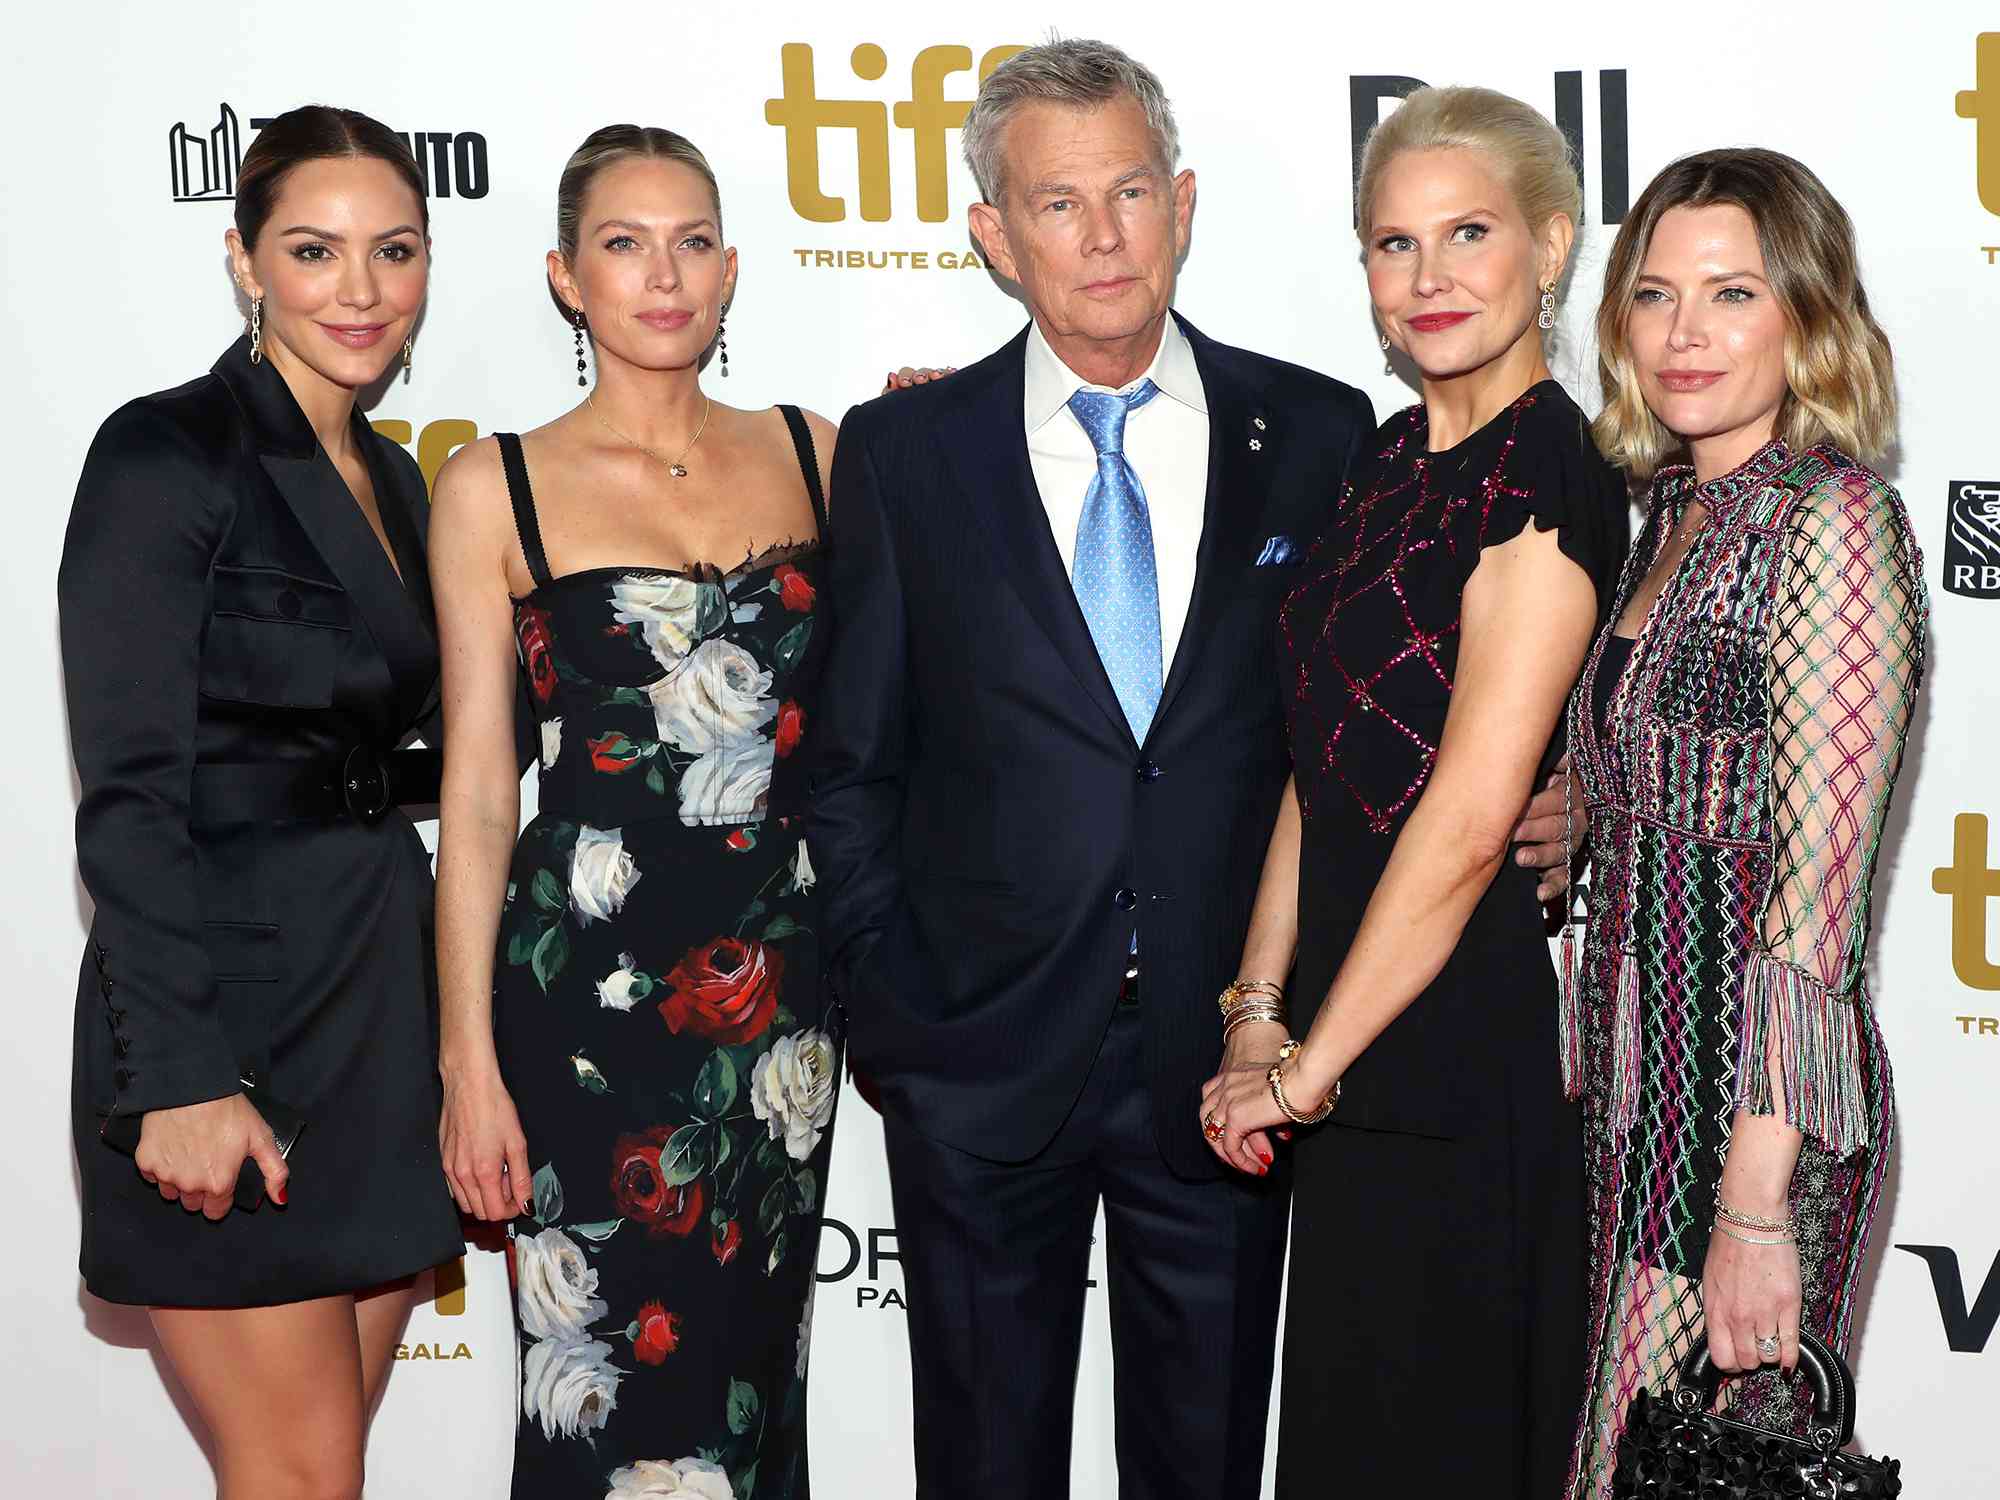 Katharine McPhee, Jordan Foster, David Foster, Amy Foster and Erin Foster attend the 2019 Toronto International Film Festival TIFF Tribute Gala at The Fairmont Royal York Hotel on September 09, 2019 in Toronto, Canada